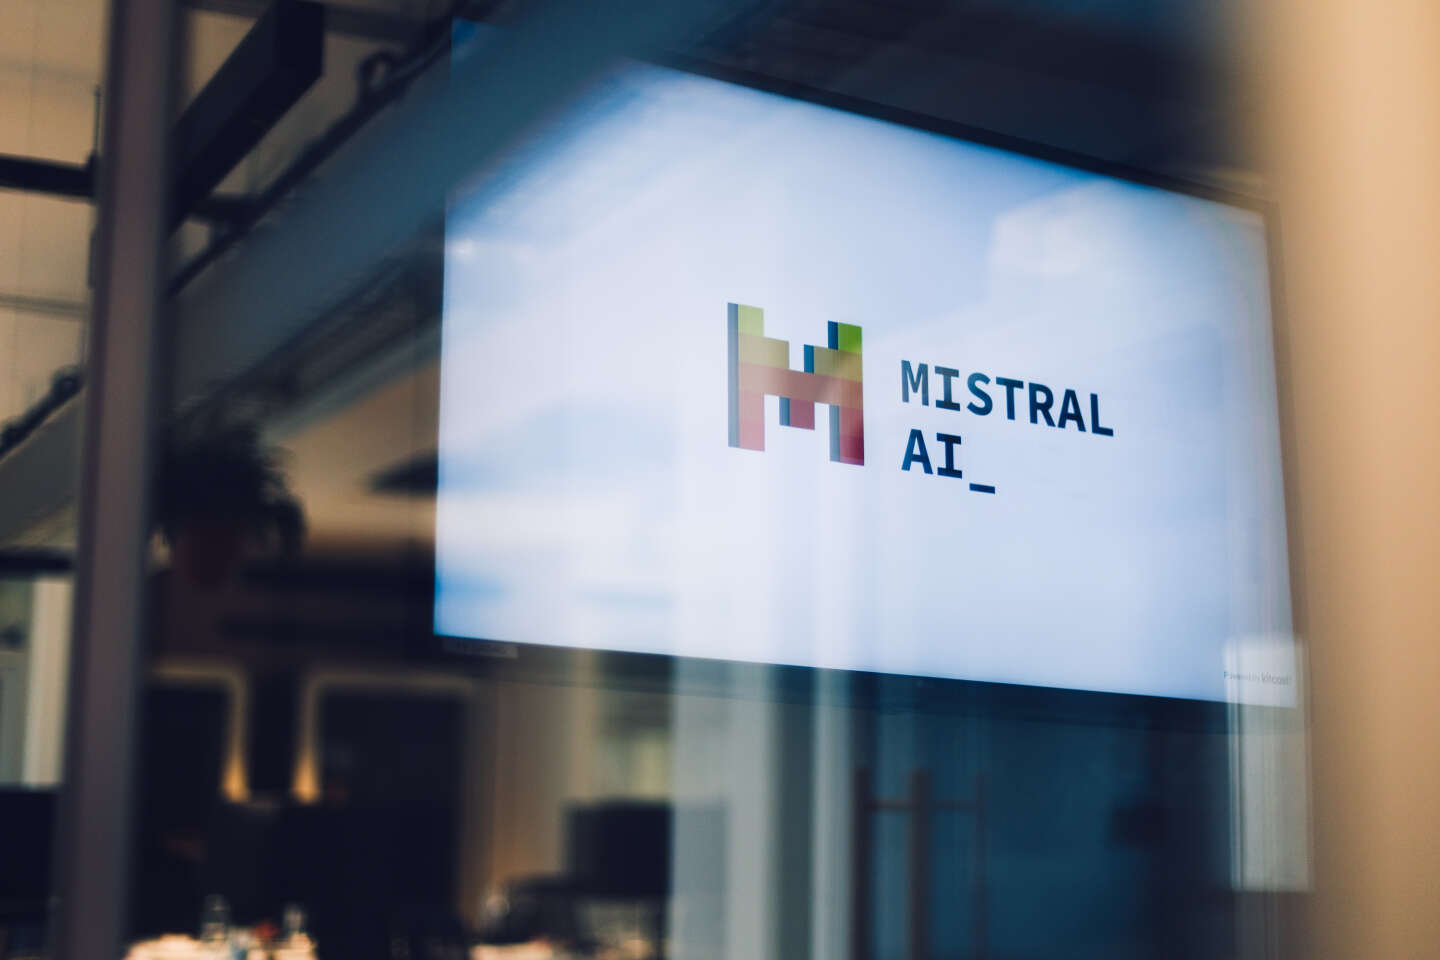 Artificial intelligence: Mistral AI's collaboration with Microsoft is raising eyebrows in Brussels